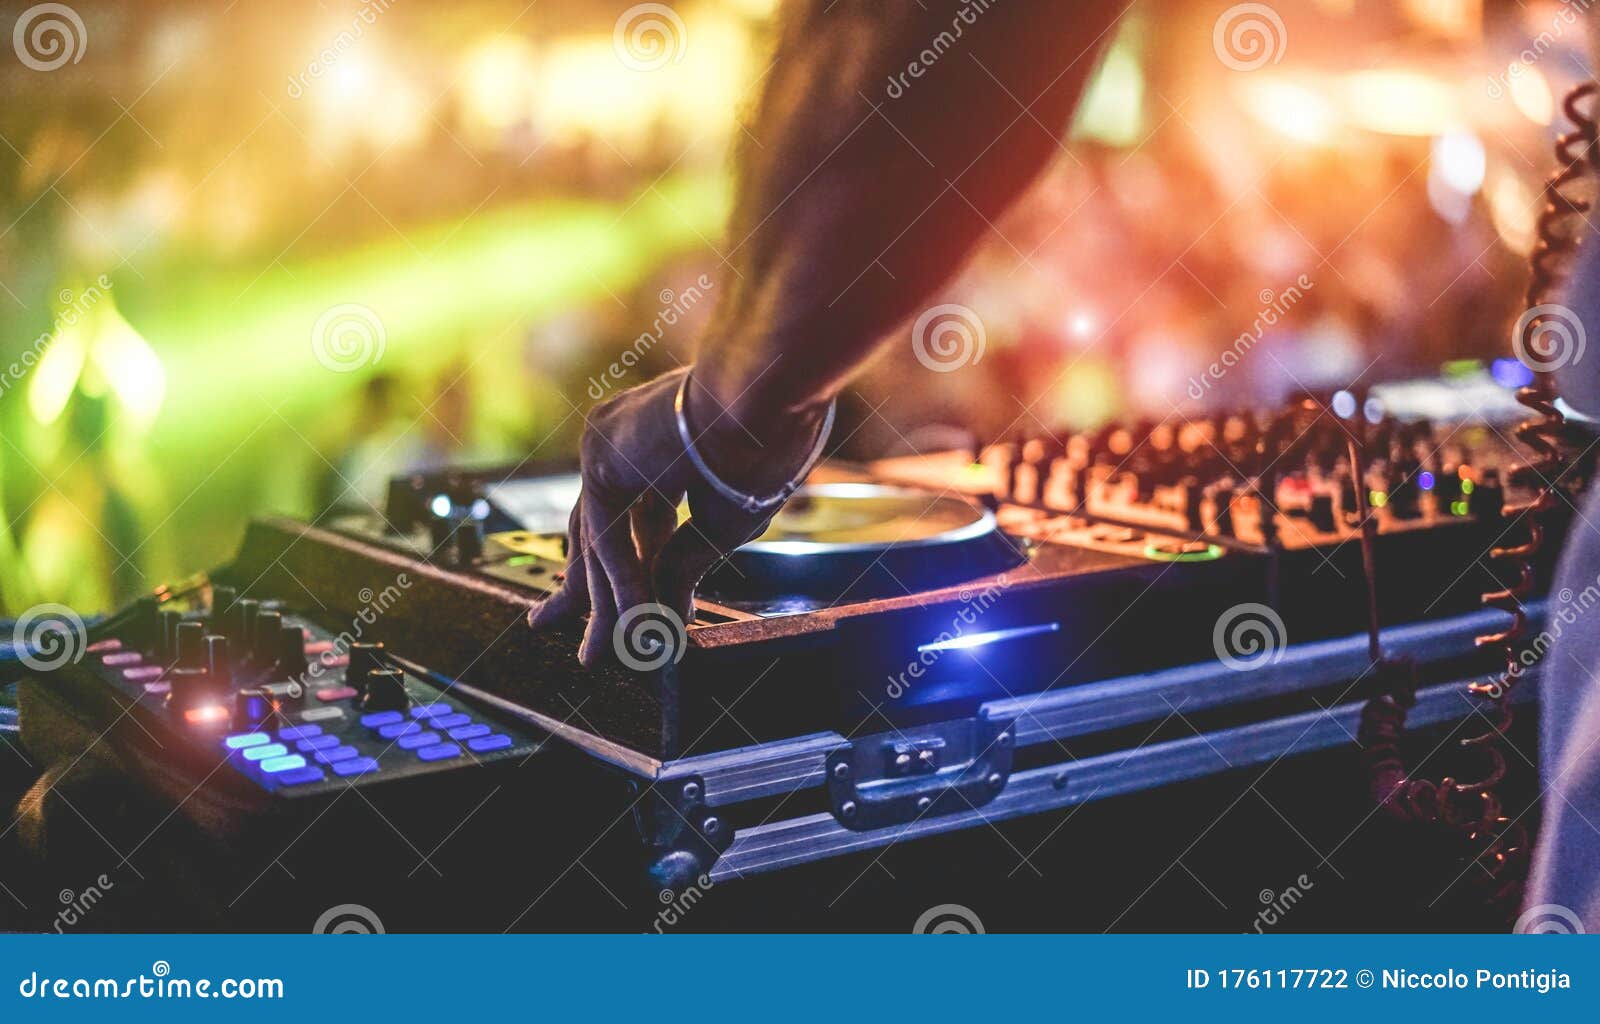 dj mixing outdoor at beach party festival with crowd of people in background - summer nightlife view of disco club outside - soft